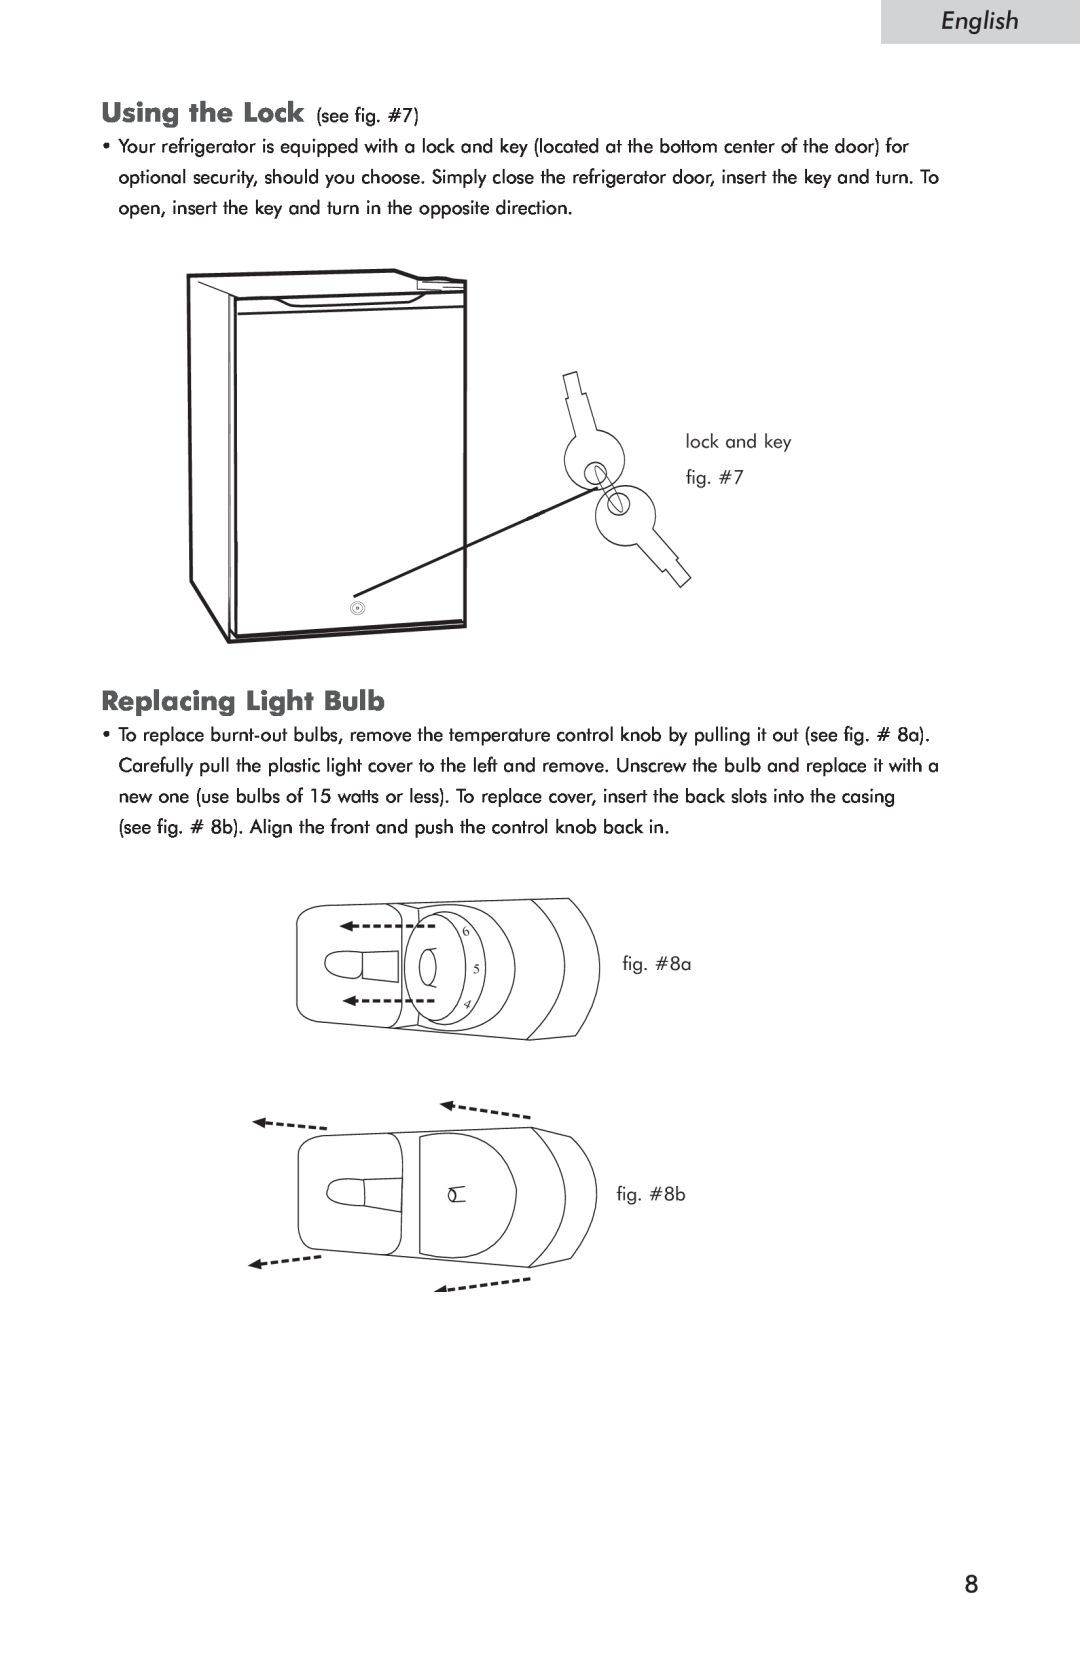 Haier HSQ05WNC user manual Using the Lock see fig. #7, Replacing Light Bulb, English 